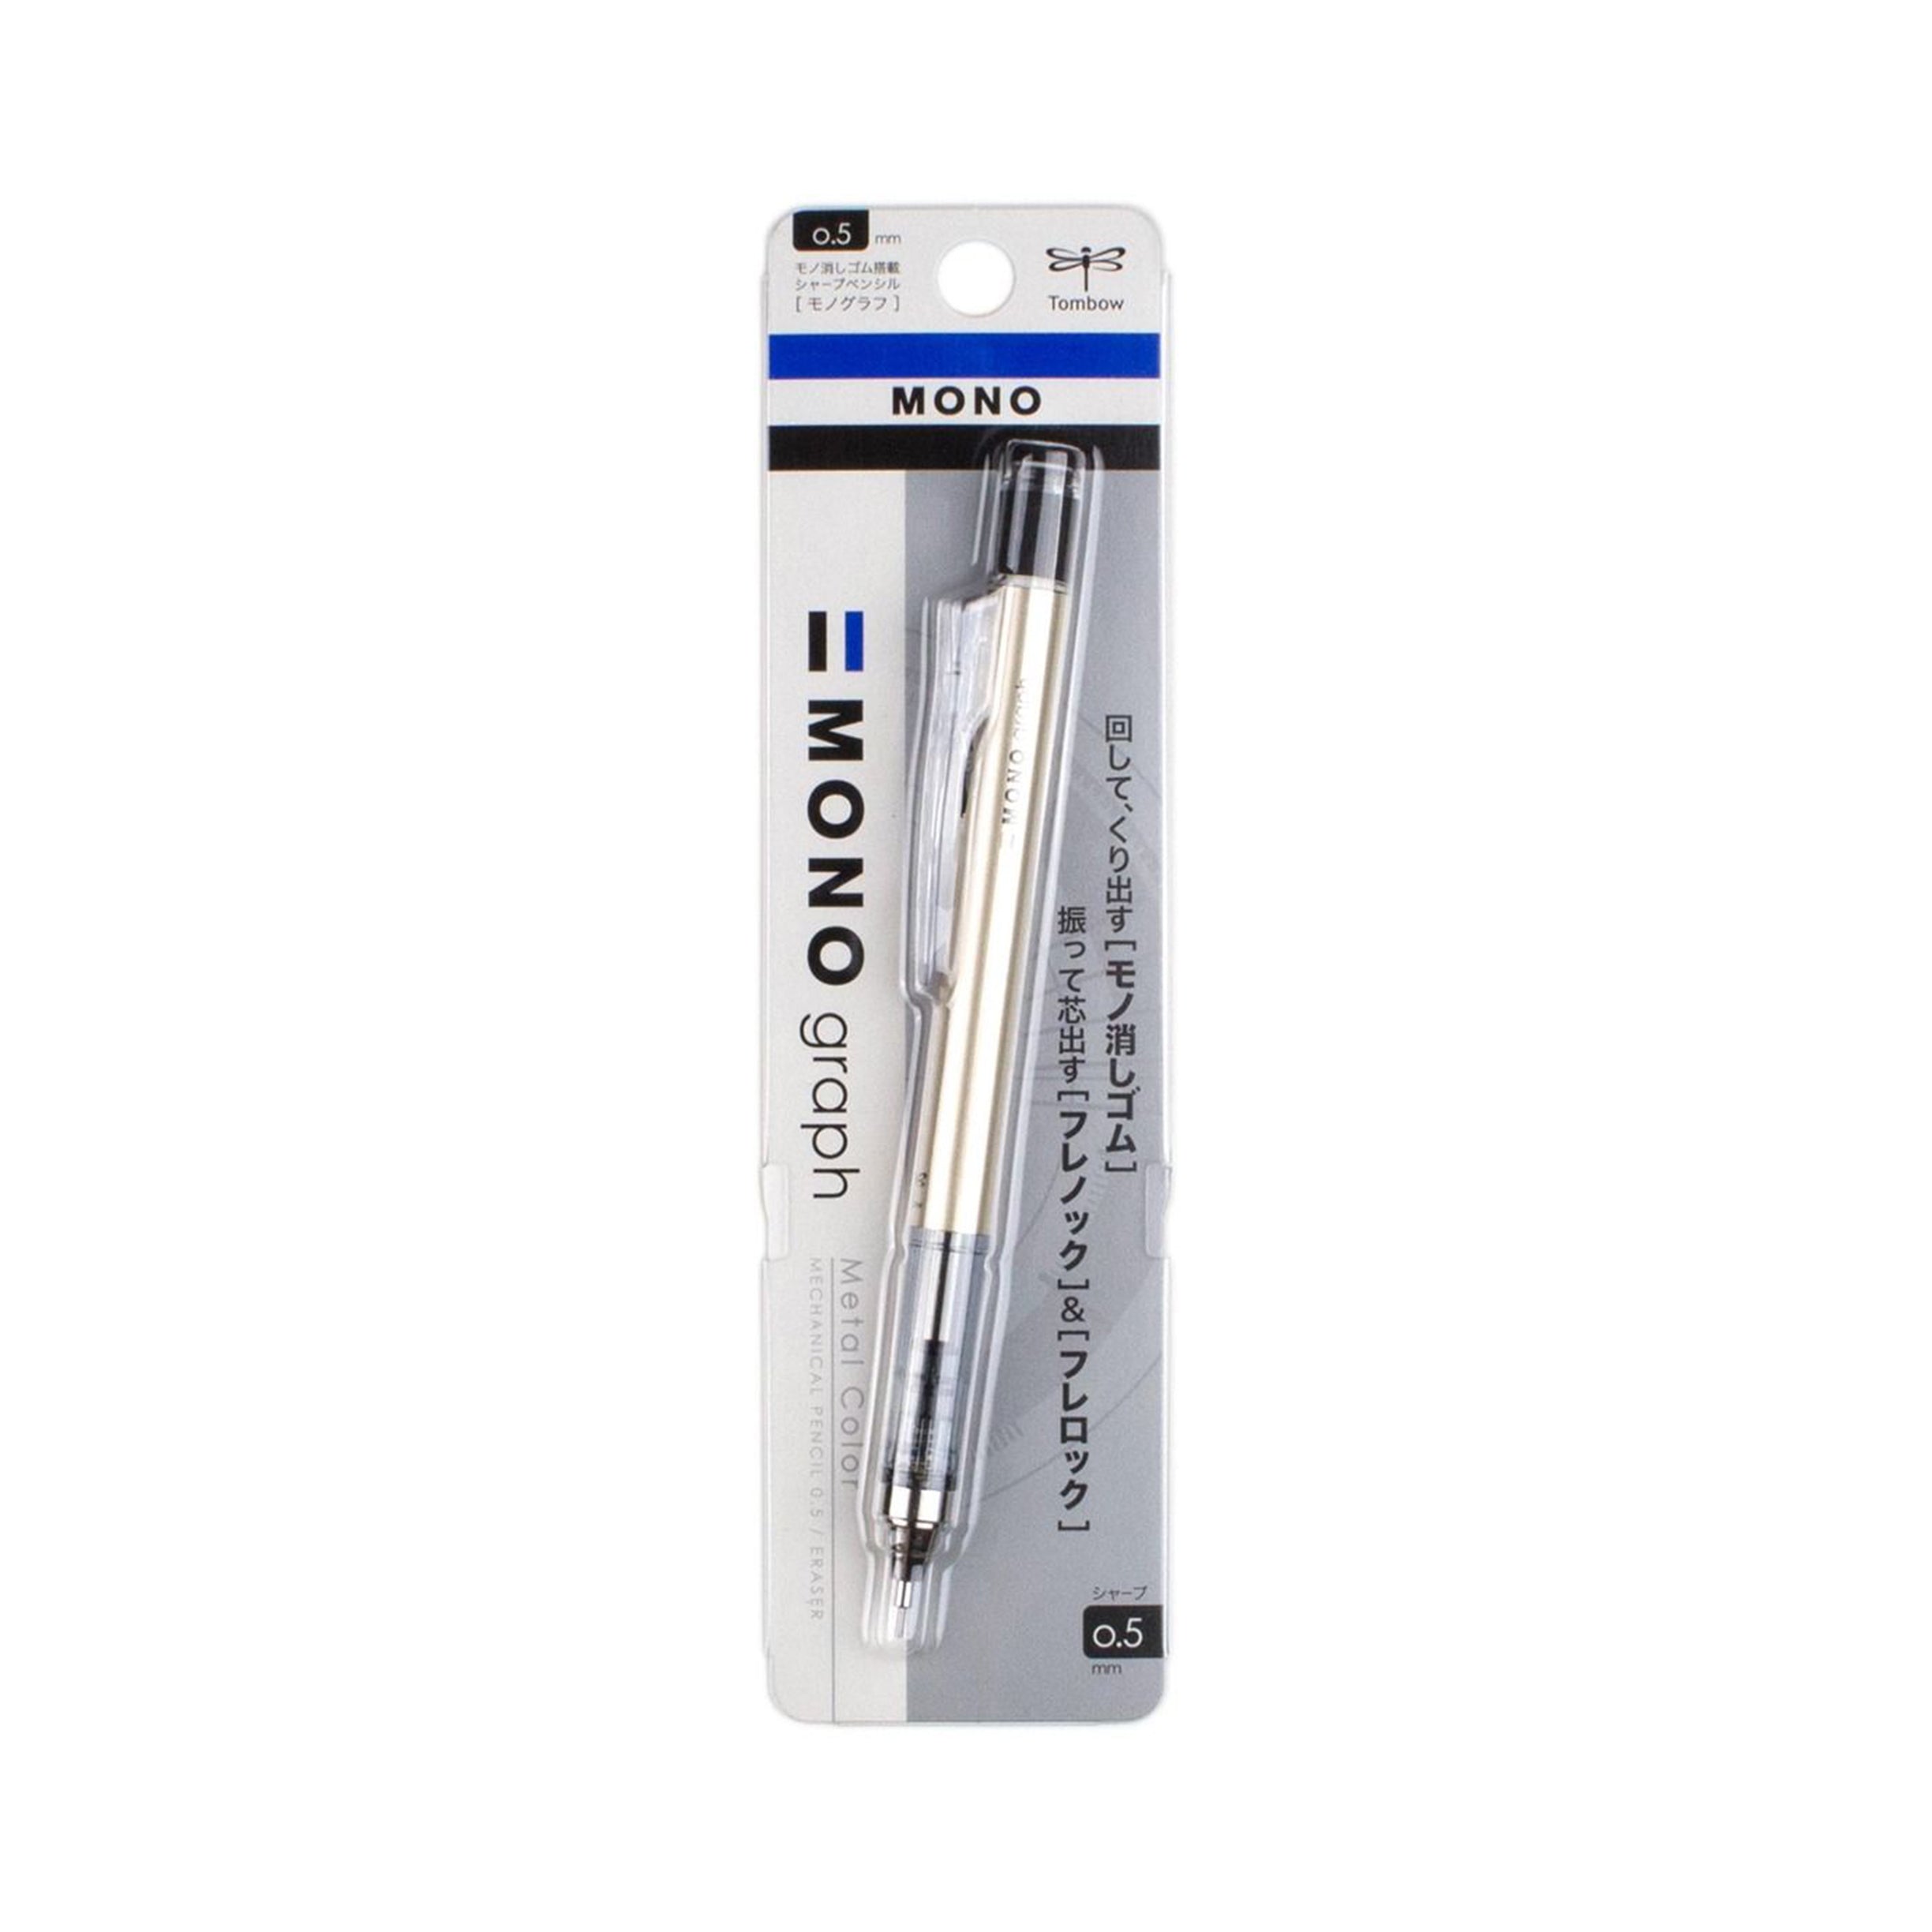 Tombow Mechanical Pencil, Monograph 0.5mm, Gold (DPA-132H)